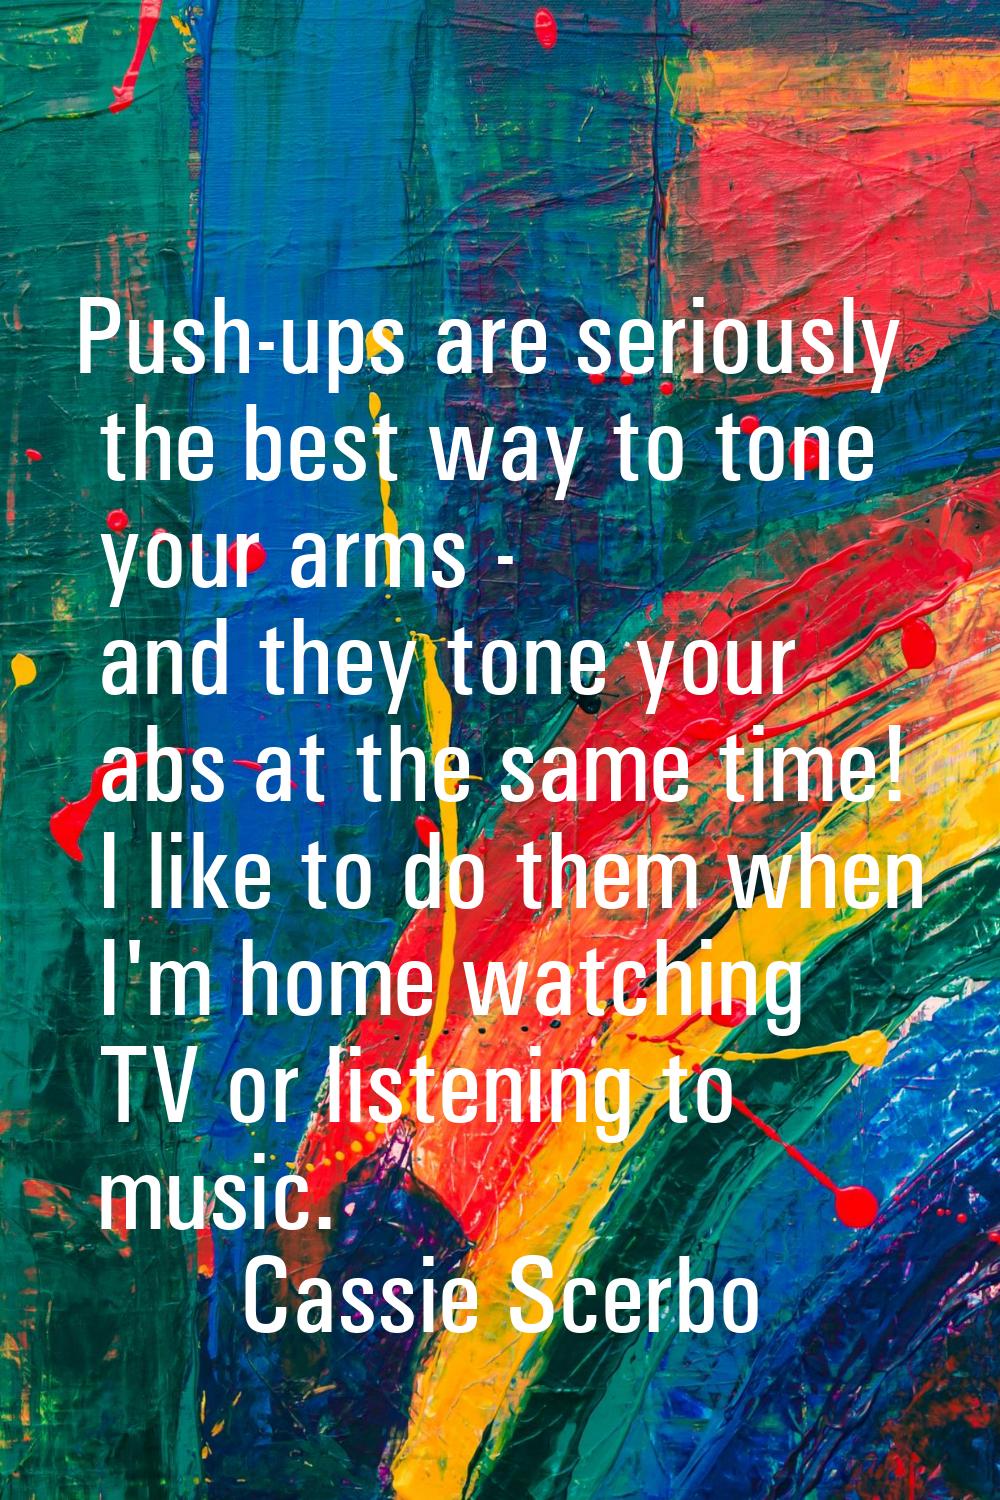 Push-ups are seriously the best way to tone your arms - and they tone your abs at the same time! I 